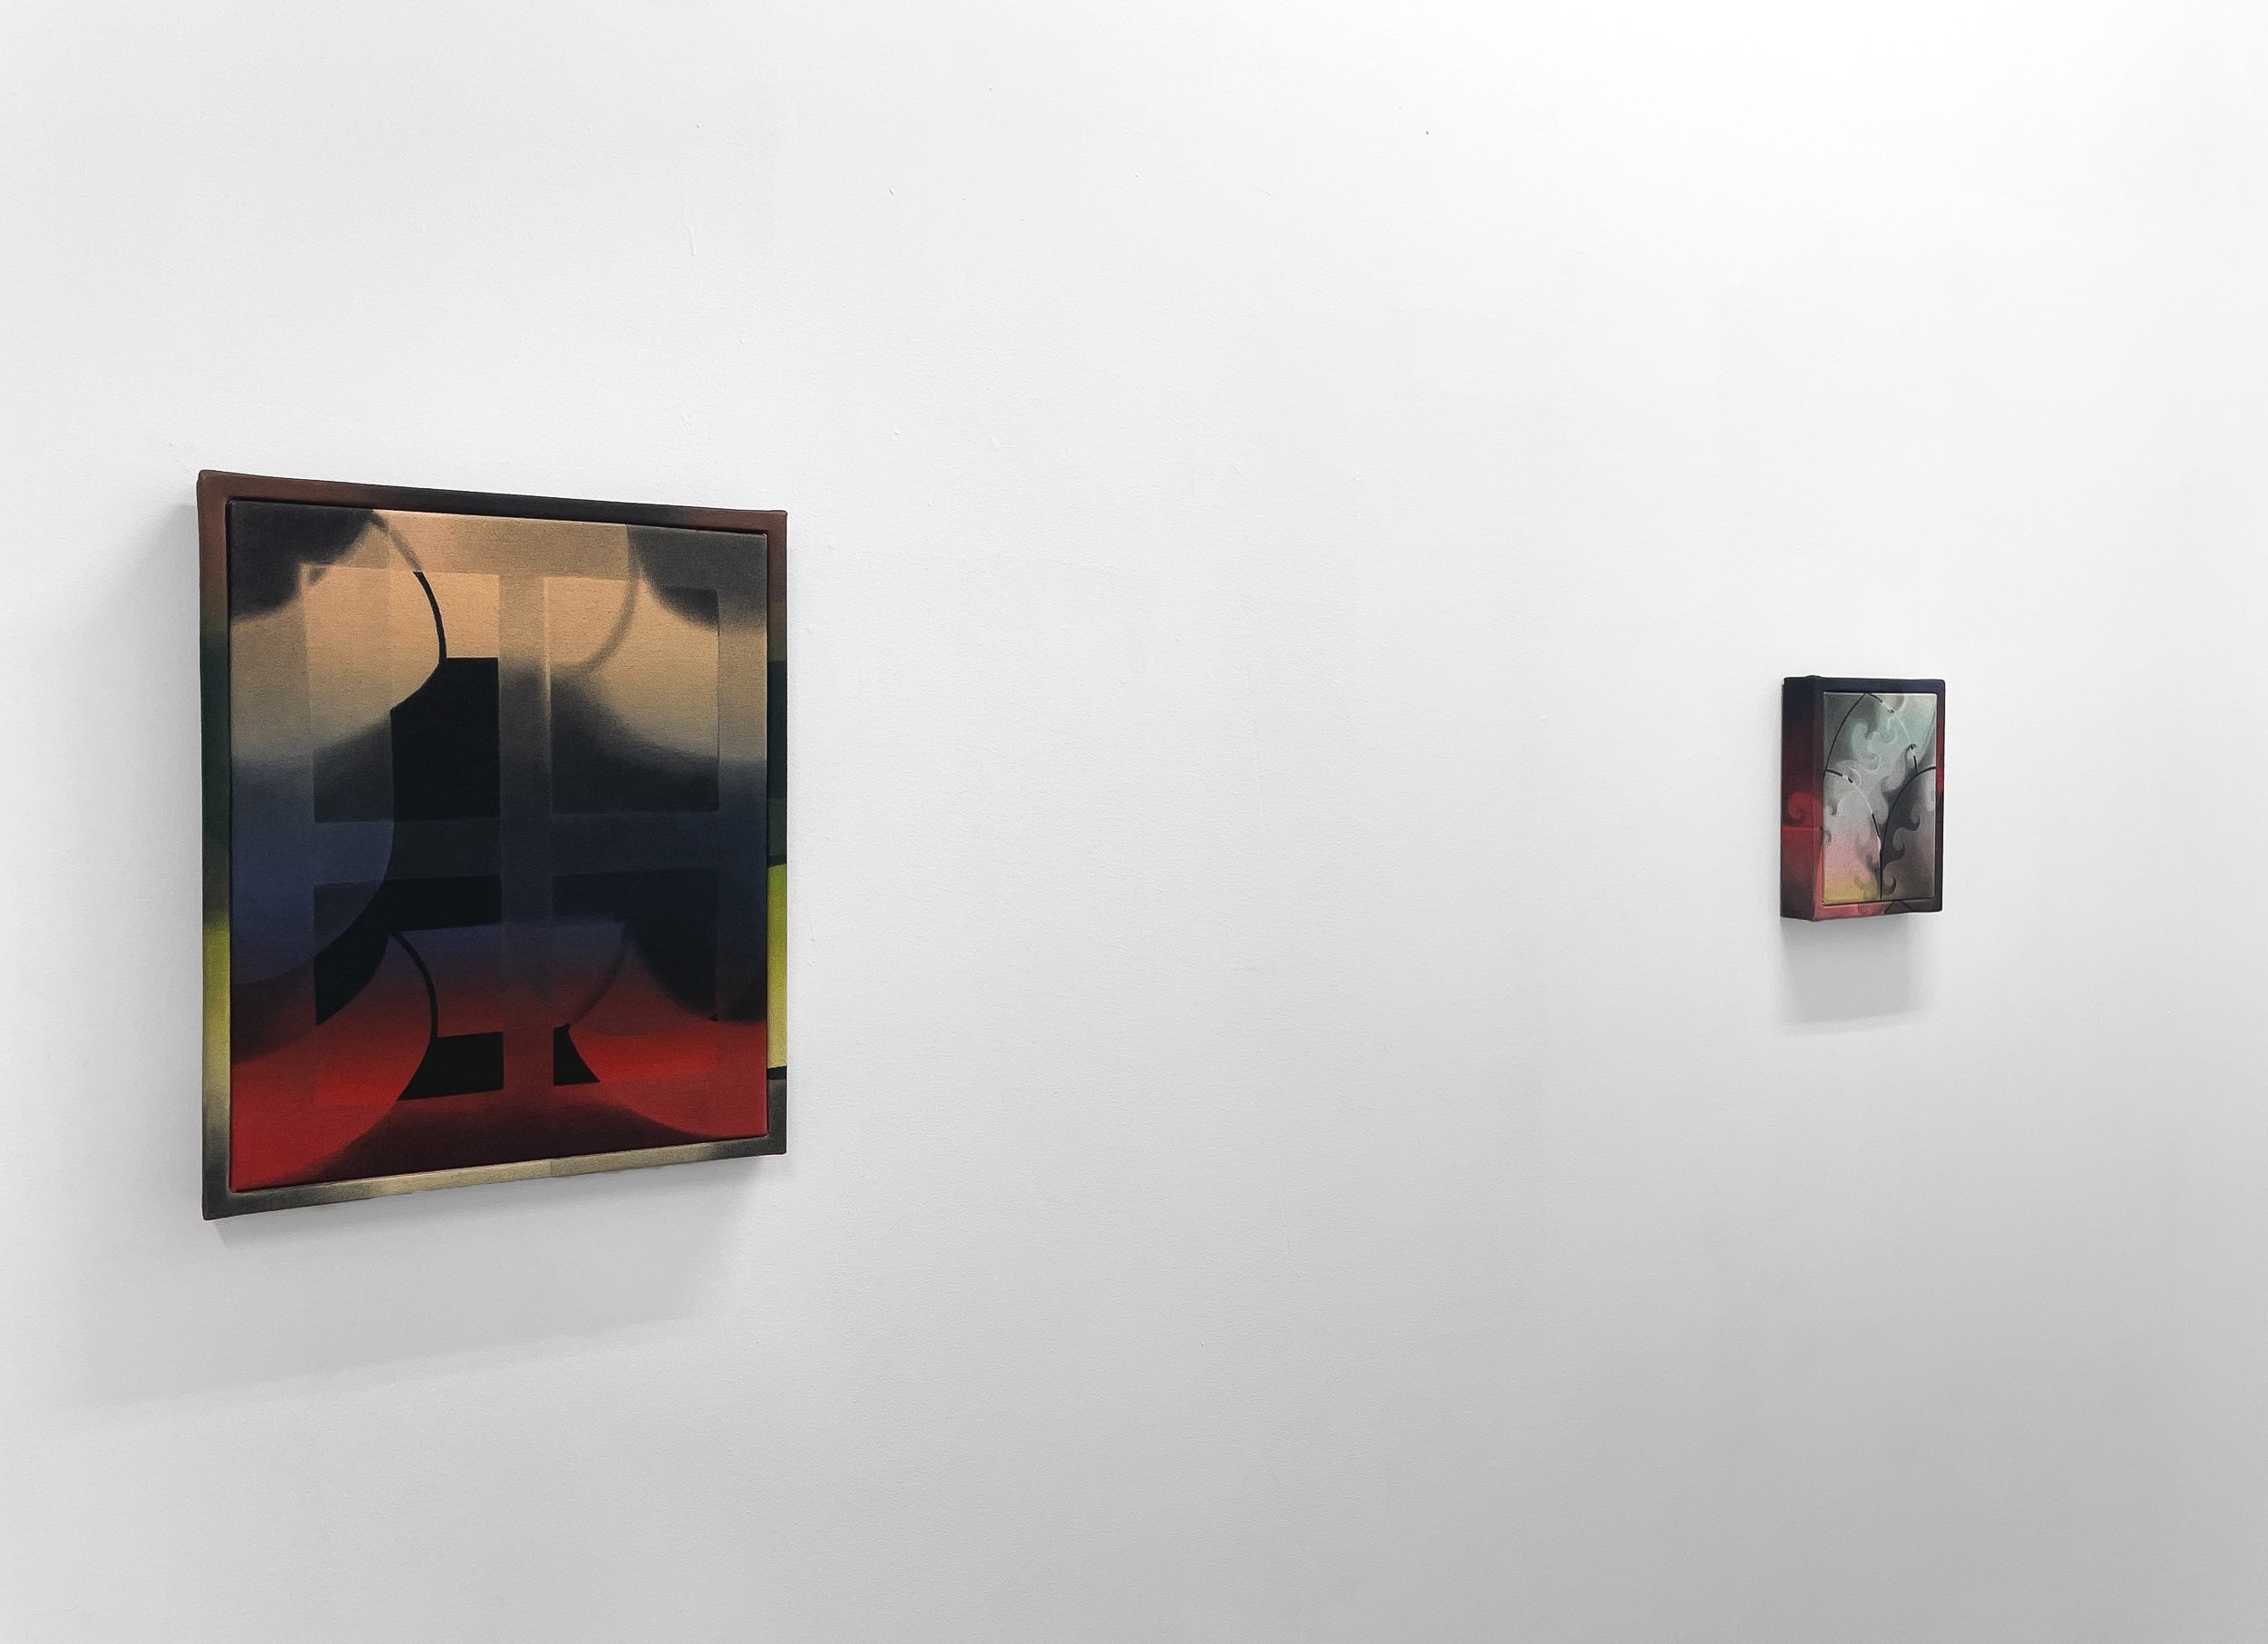  Installation view. Photo credit: Peep Projects 